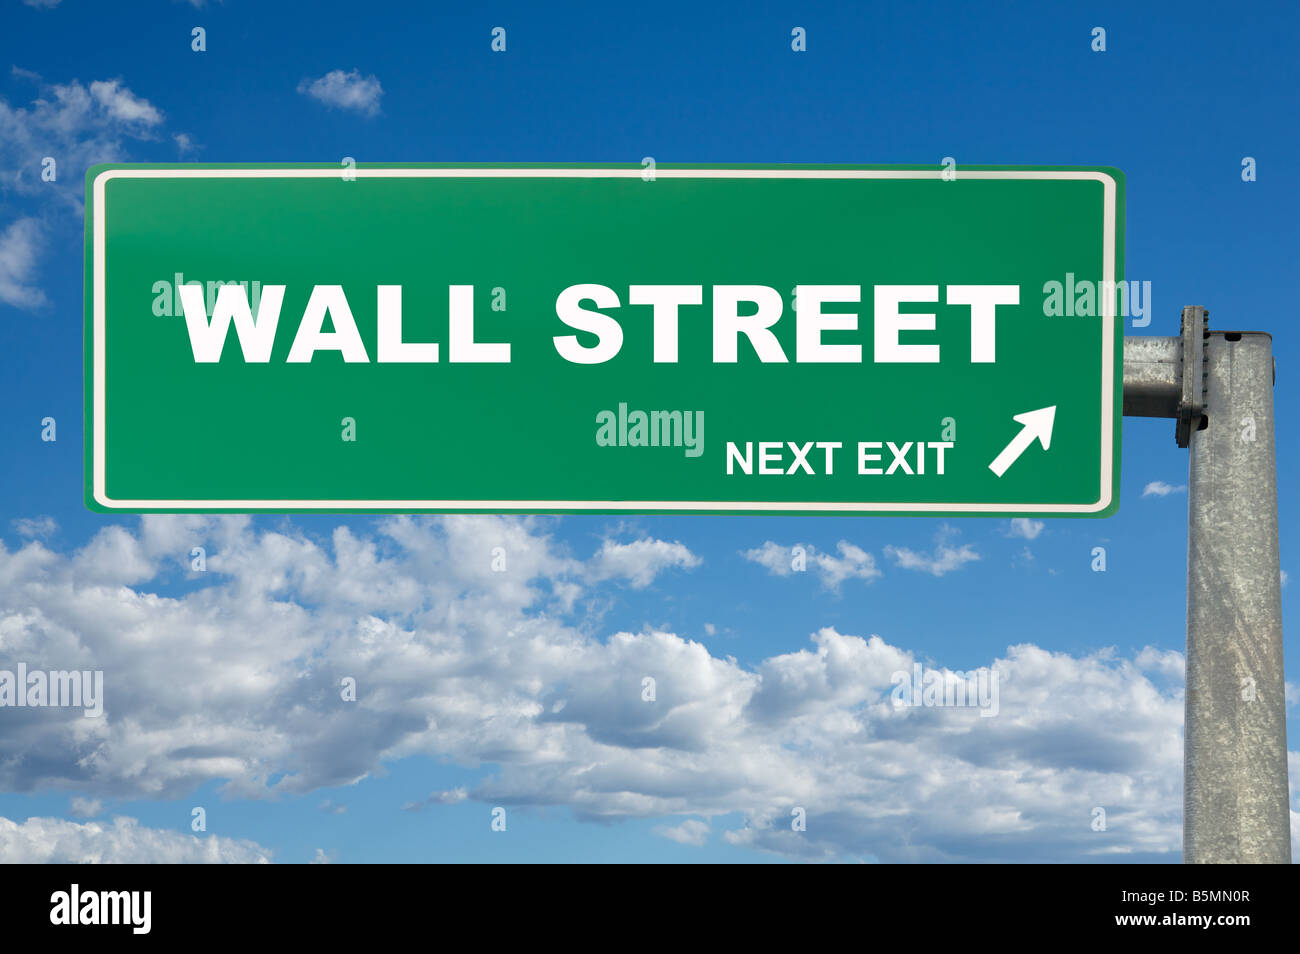 A large green traffic sign with wall street on it Stock Photo